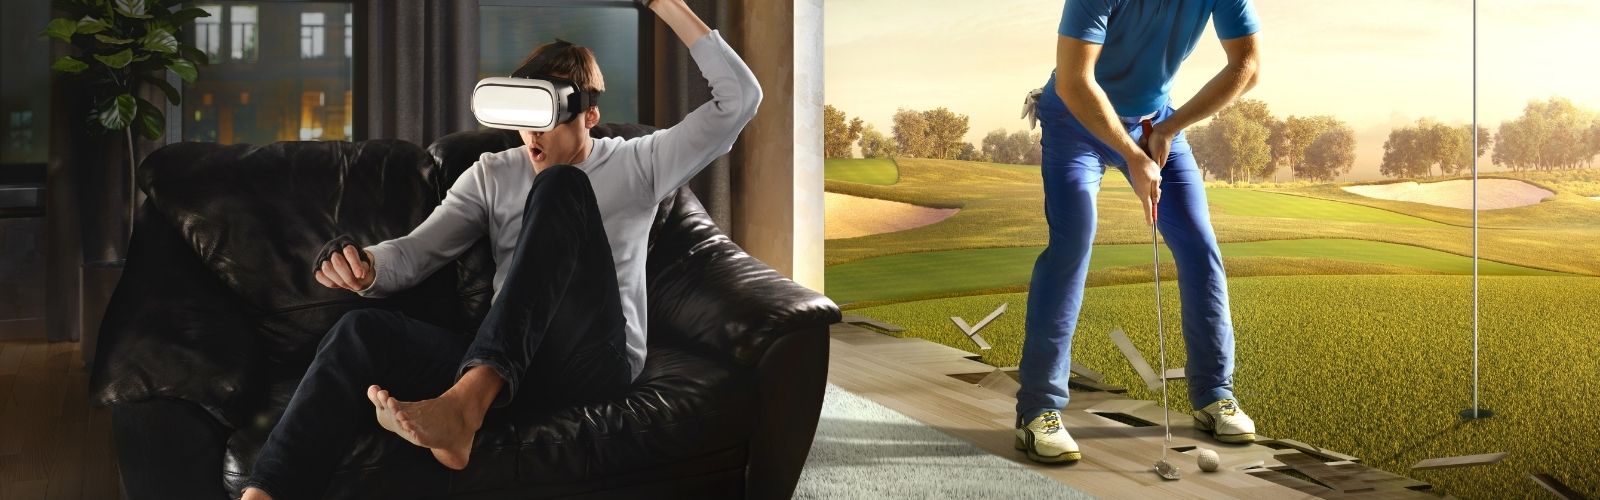 Golf Vr Cover 